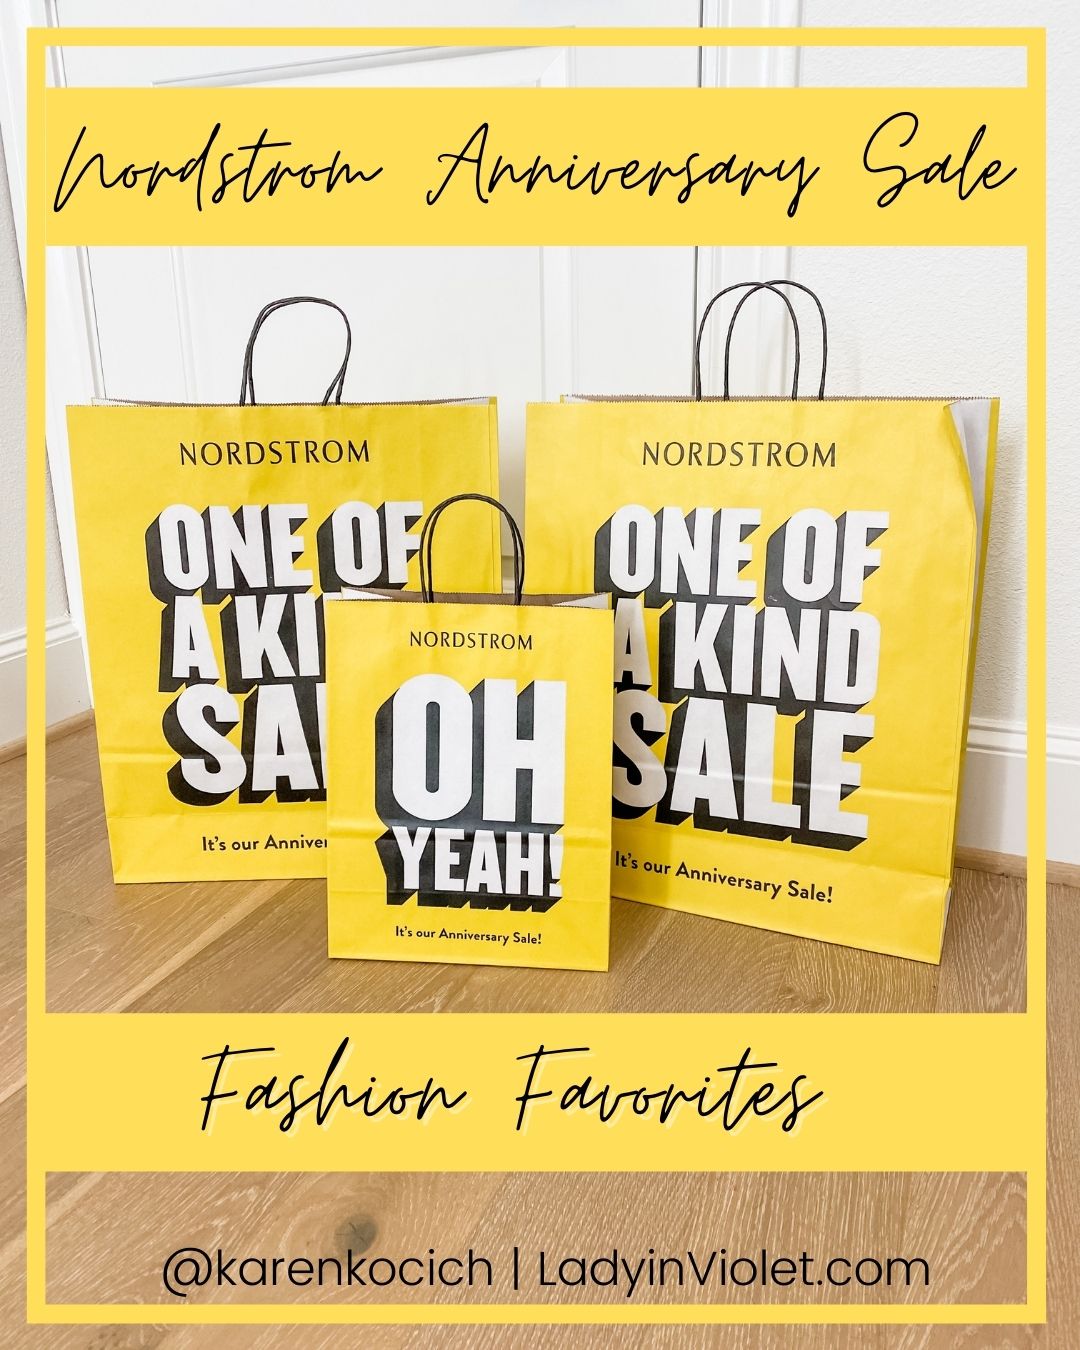 NORDSTROM ANNIVERSARY SALE: What I'm Buying (& What I'm Not)